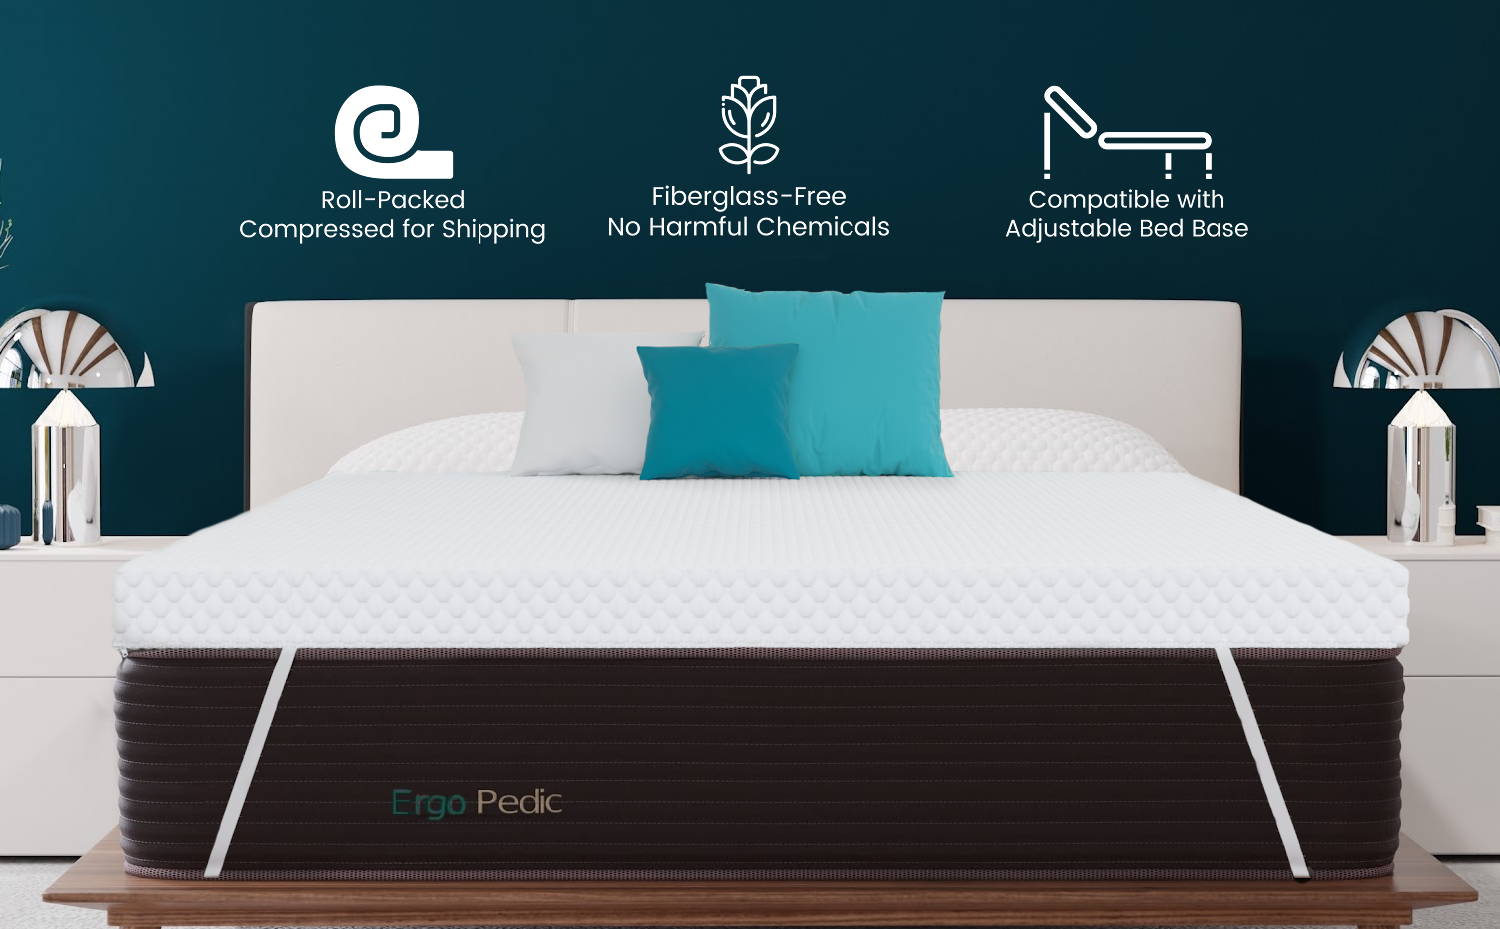 ZenCloud Oasis by Ergo-Pedic is roll-packed and compressed for shipping, fiberglass-free with no harmful chemicals, and are compatible with adjustable bases.